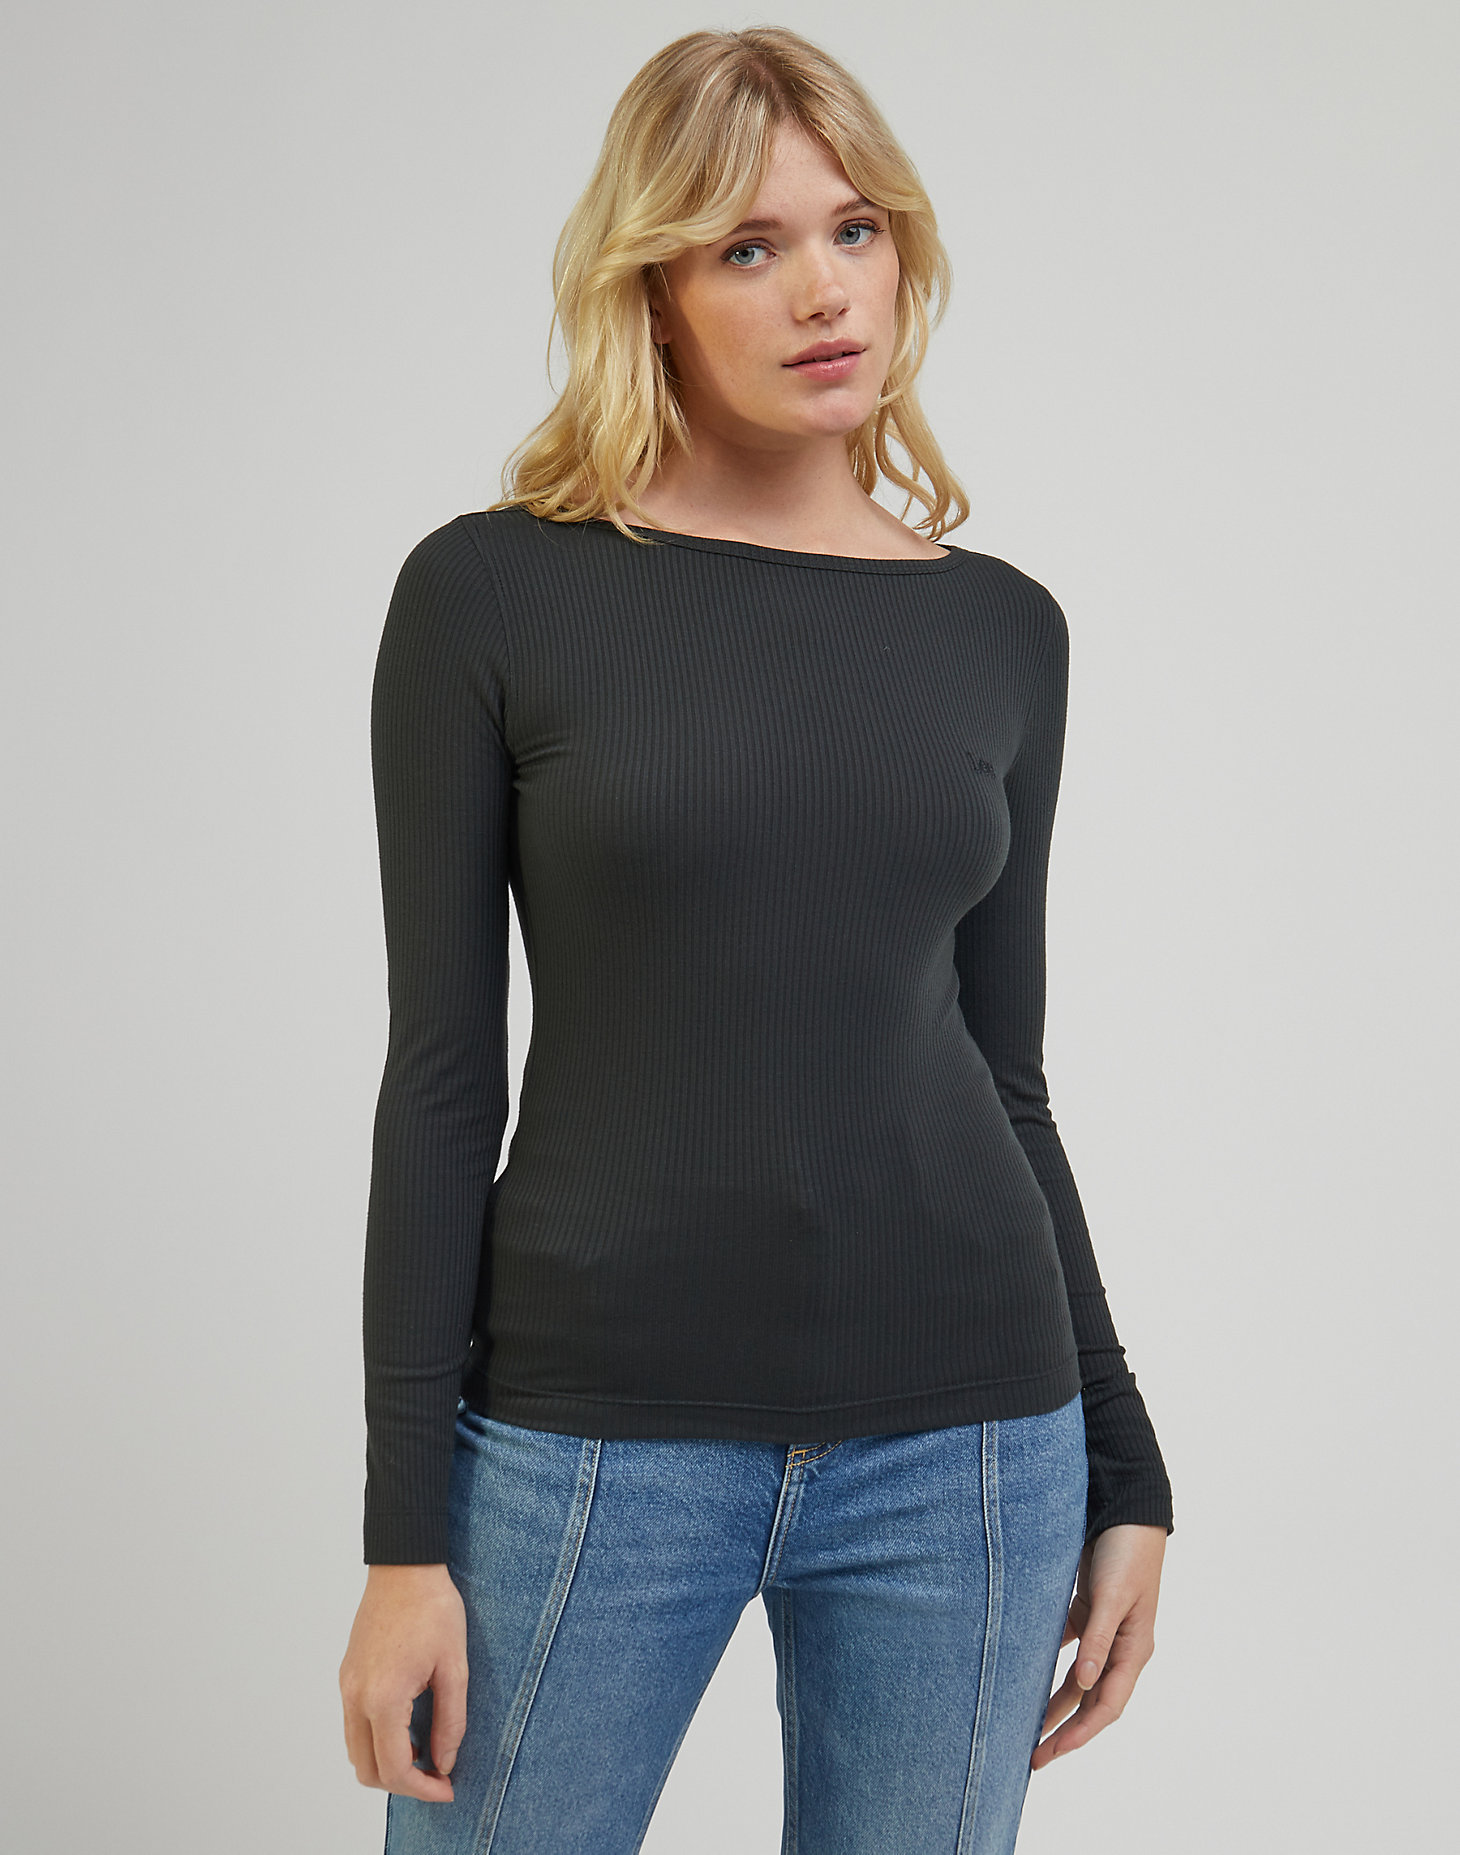 Long Sleeve Boat Neck Tee in Charcoal main view